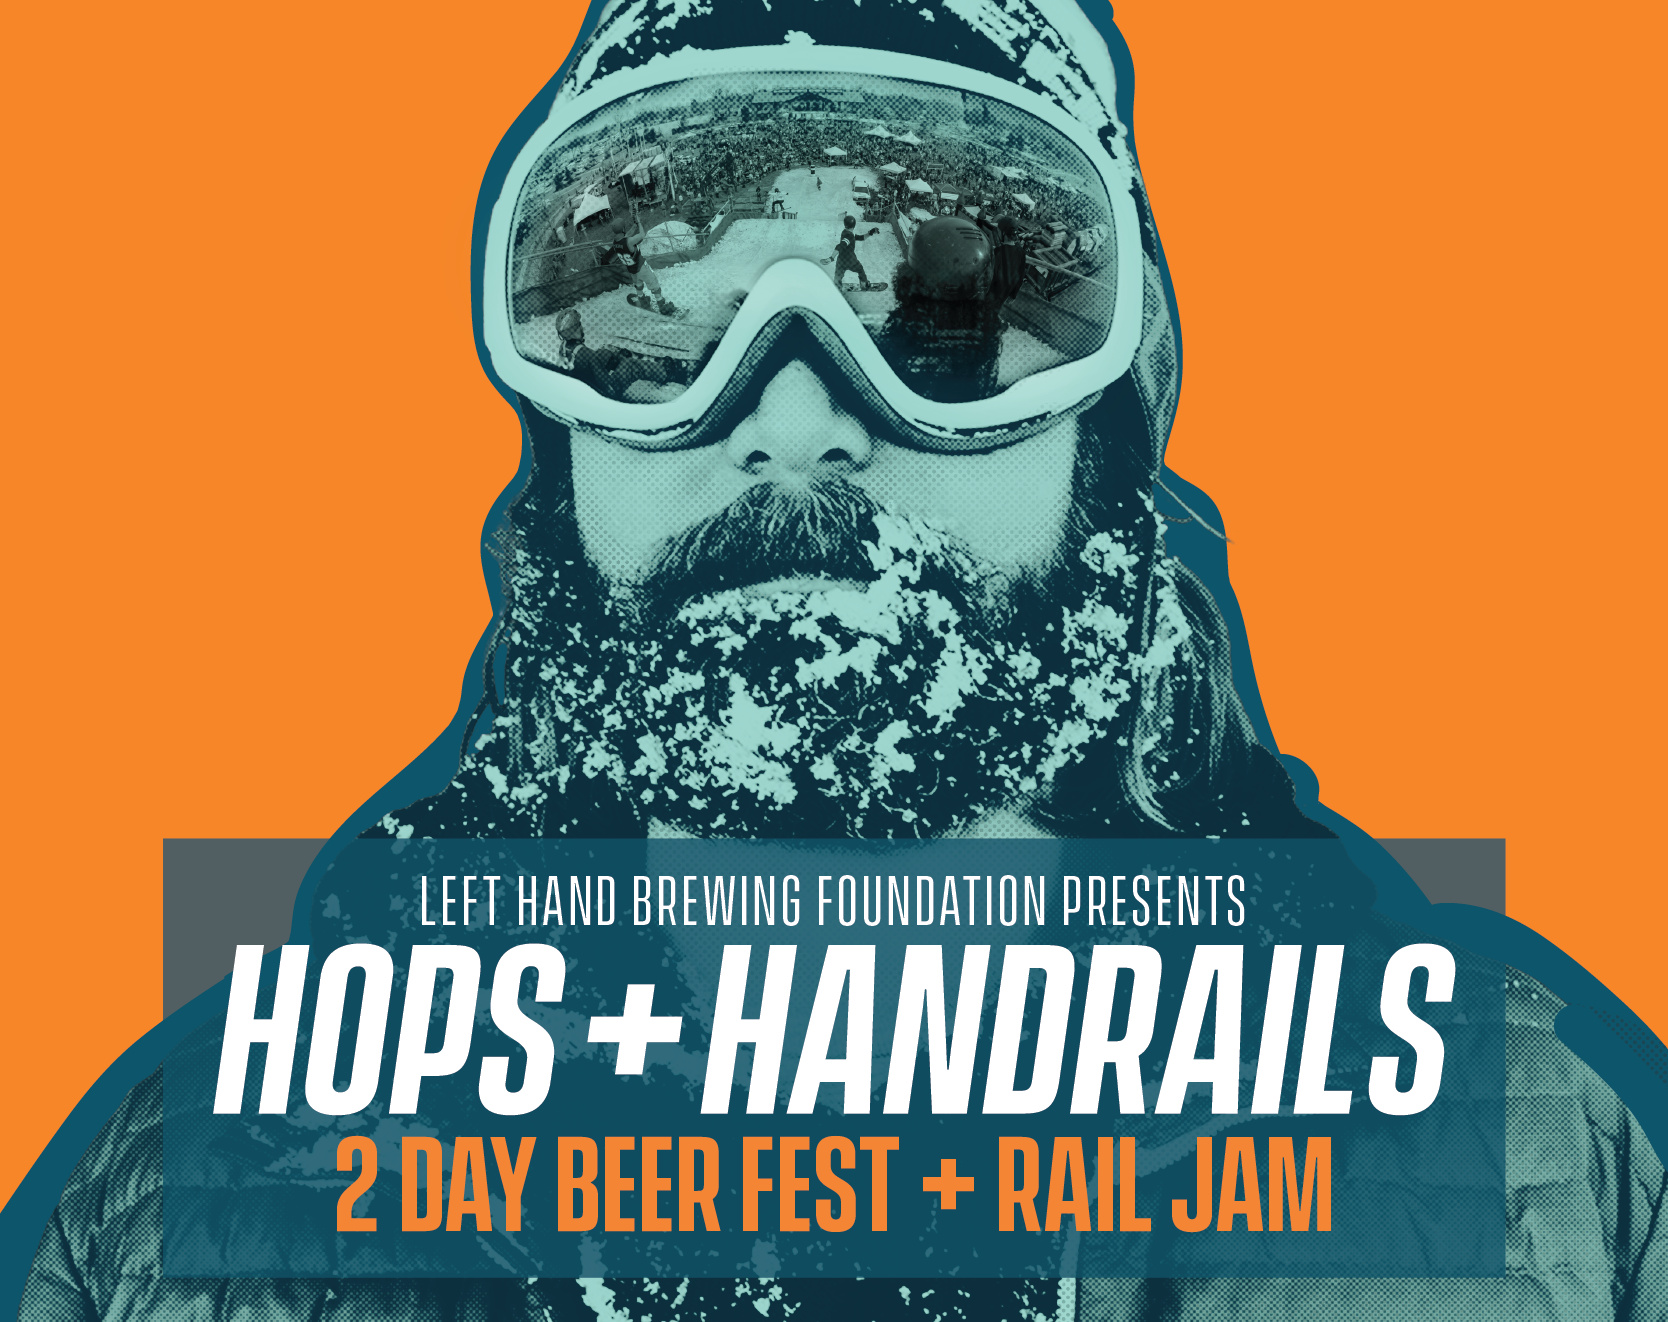 Left Hand Brewing Company hosts Hops and Handrails. Photo provided.